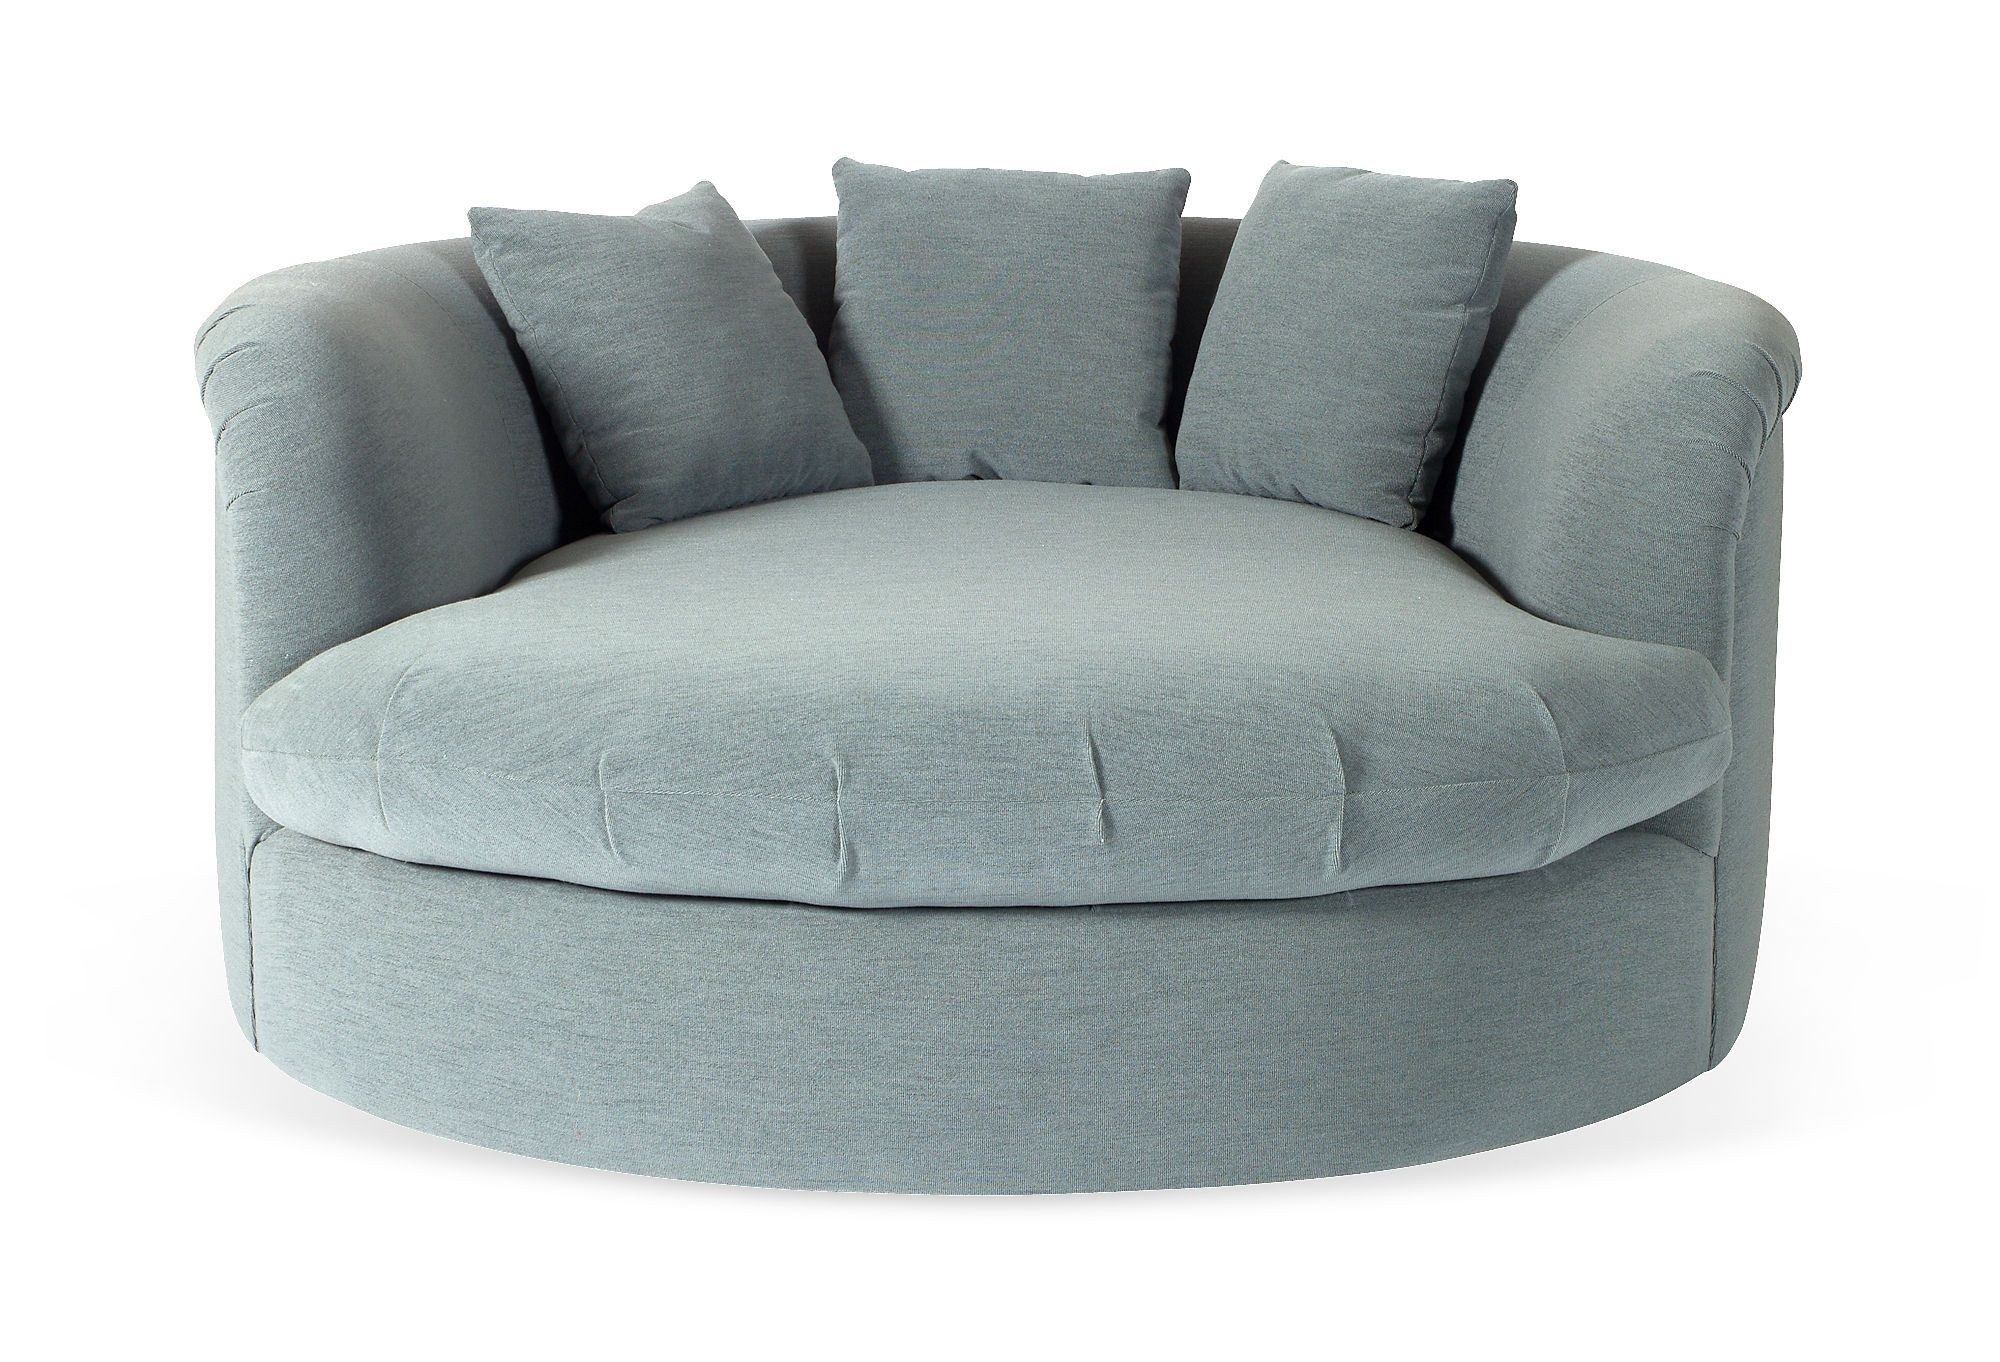 Round Chaise Lounge Chair Ideas on Foter